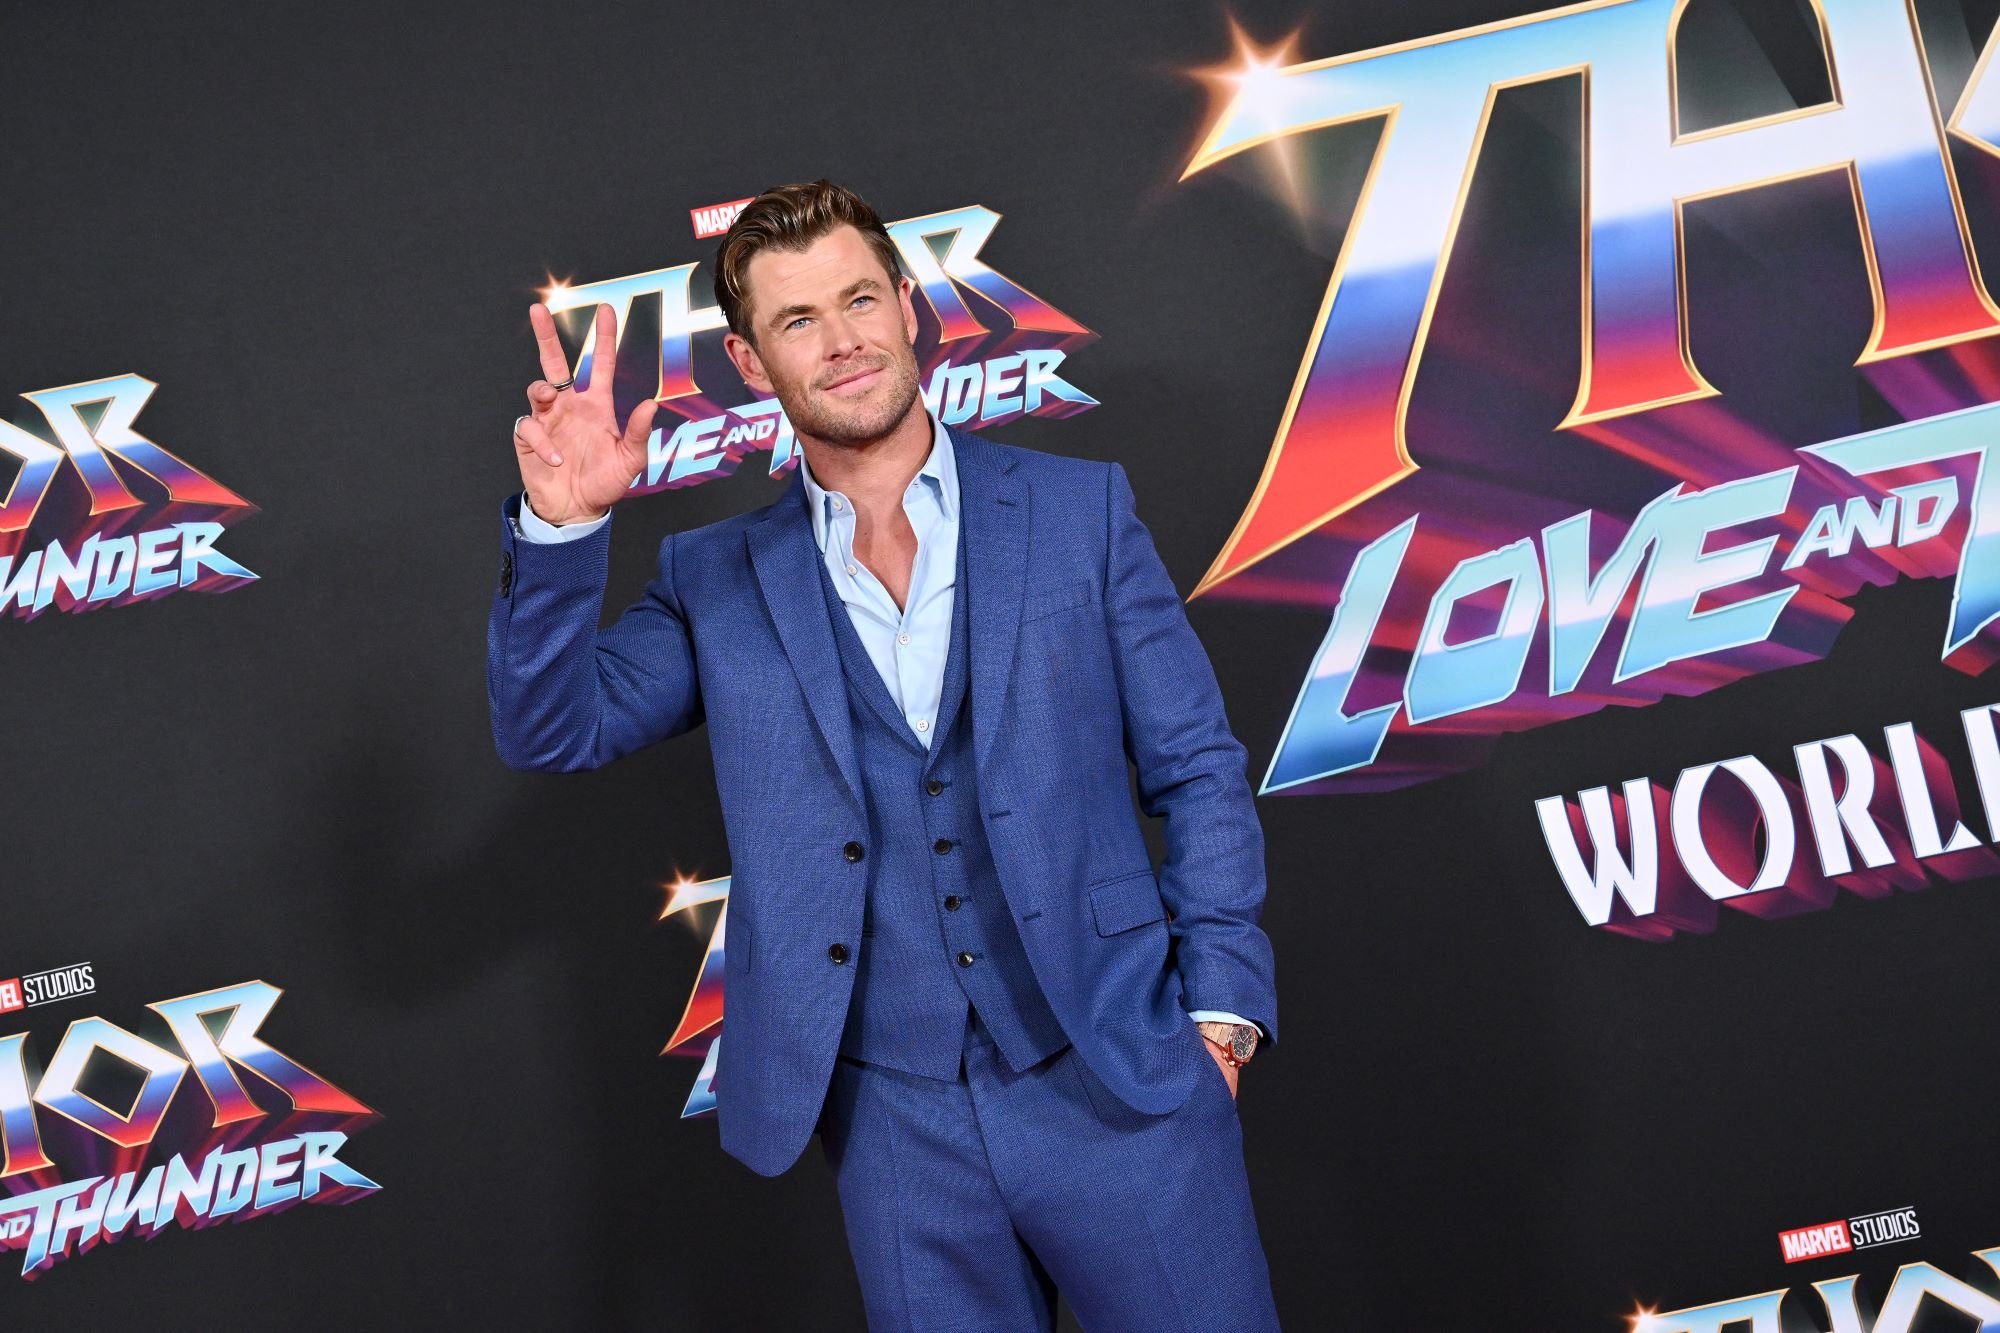 Chris Hemsworth attends the 'Thor: Love and Thunder' premiere, which brought about the first reactions to the Marvel movie, and he wears a blue suit while holding up a peace sign on the red carpet.